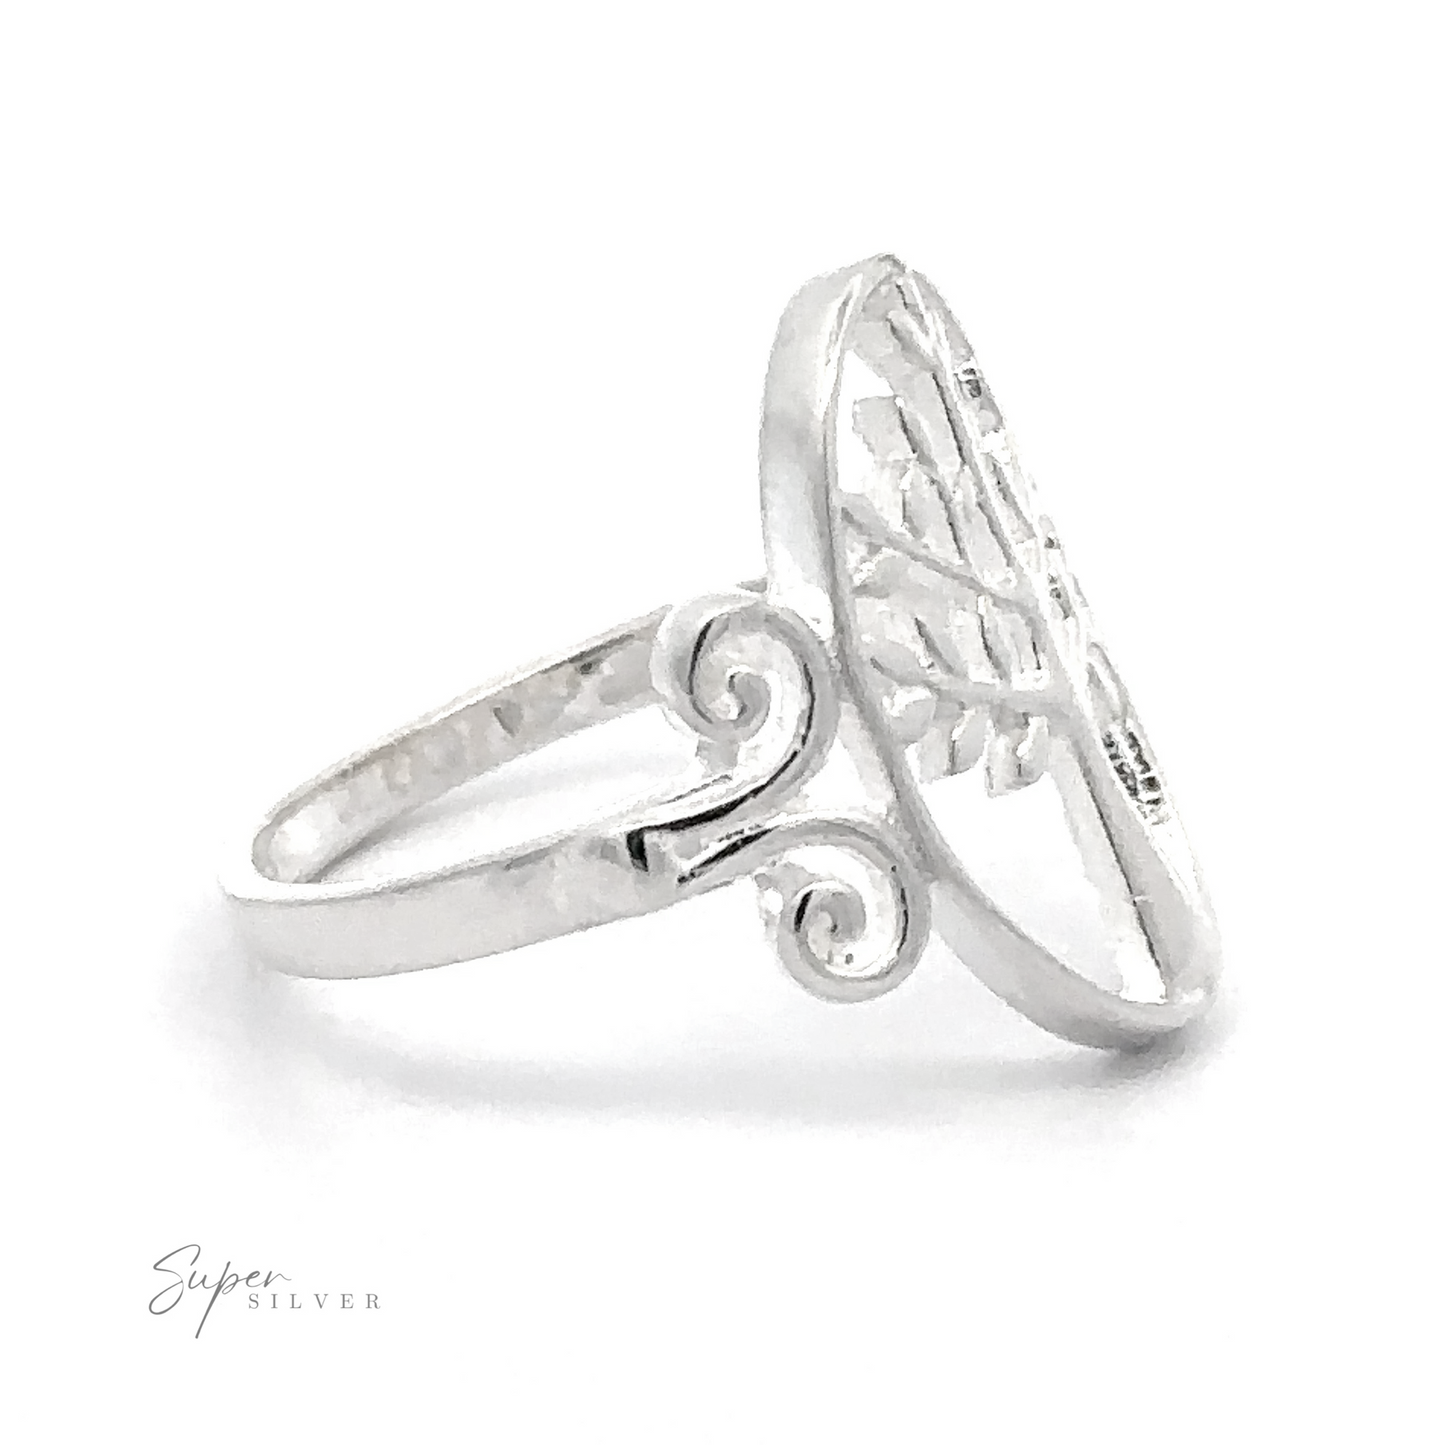 Elegant Silver Tree Ring with Oval Setting with filigree design on a white background.